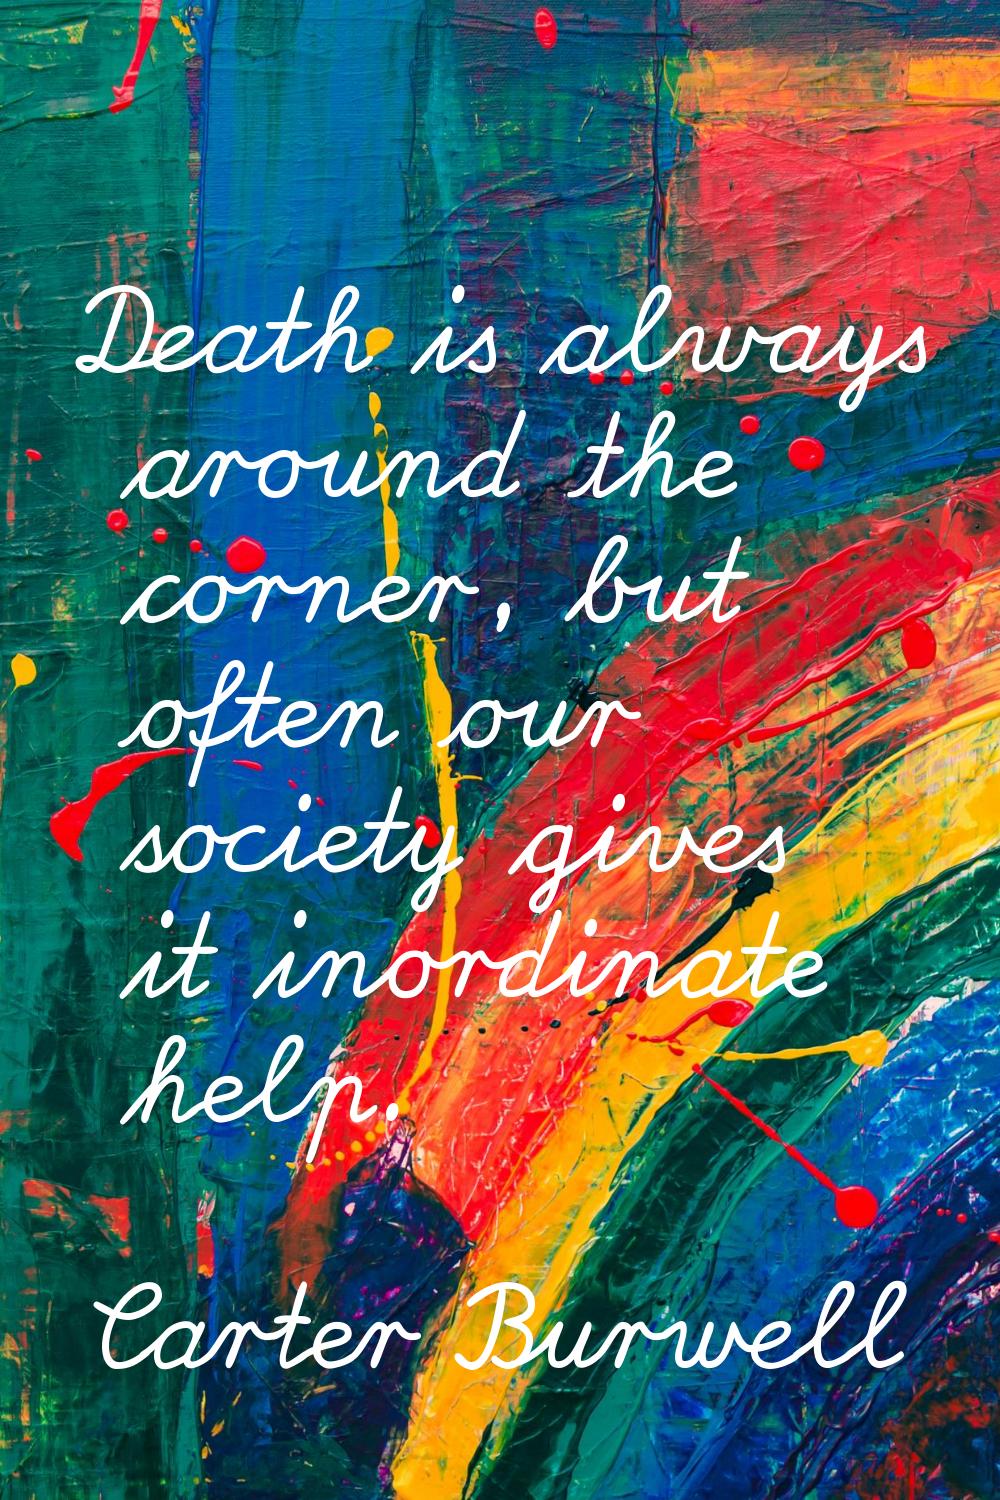 Death is always around the corner, but often our society gives it inordinate help.